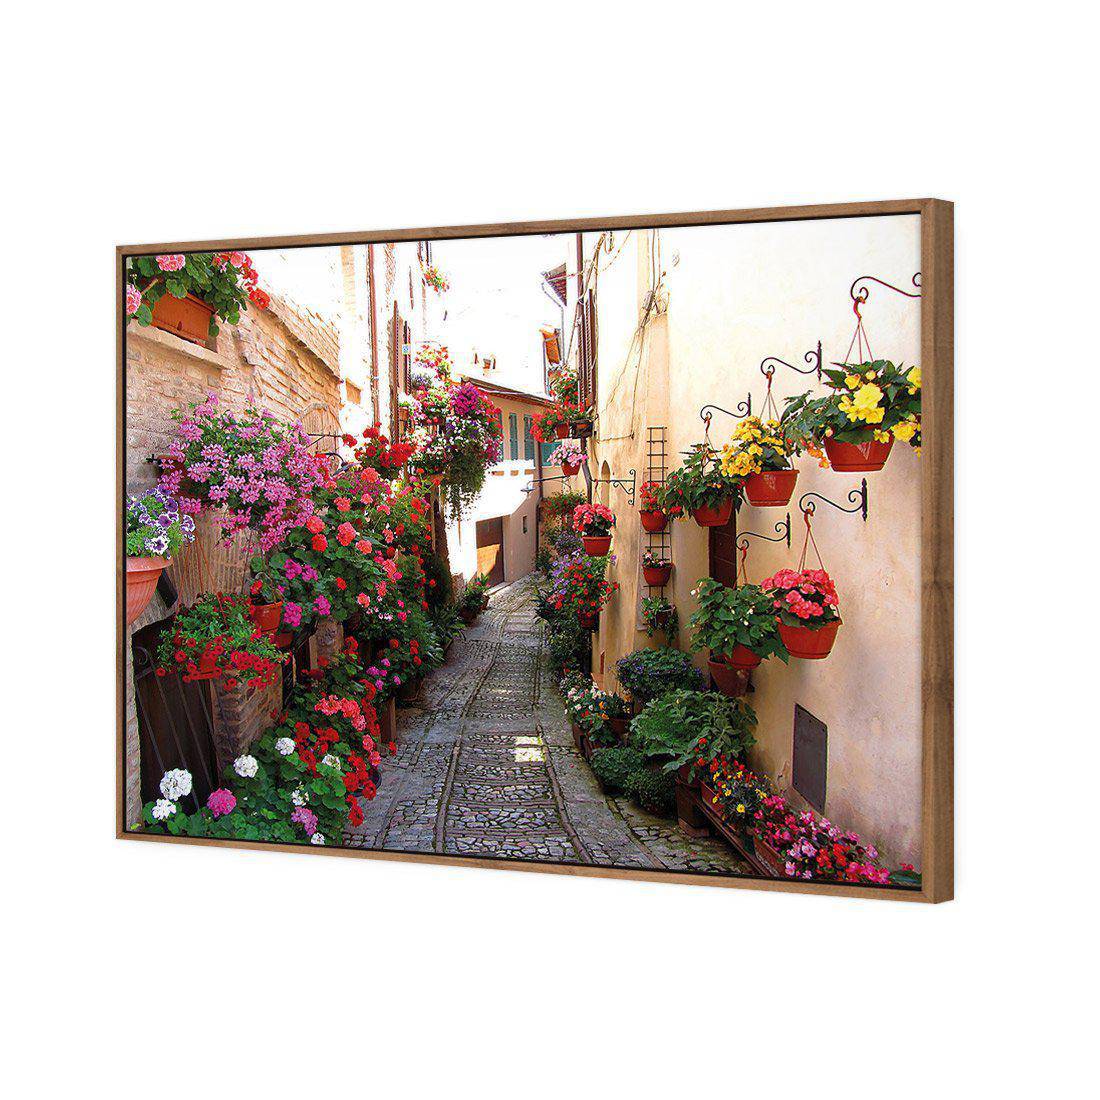 Floral Alley In Italy Canvas Art-Canvas-Wall Art Designs-45x30cm-Canvas - Natural Frame-Wall Art Designs